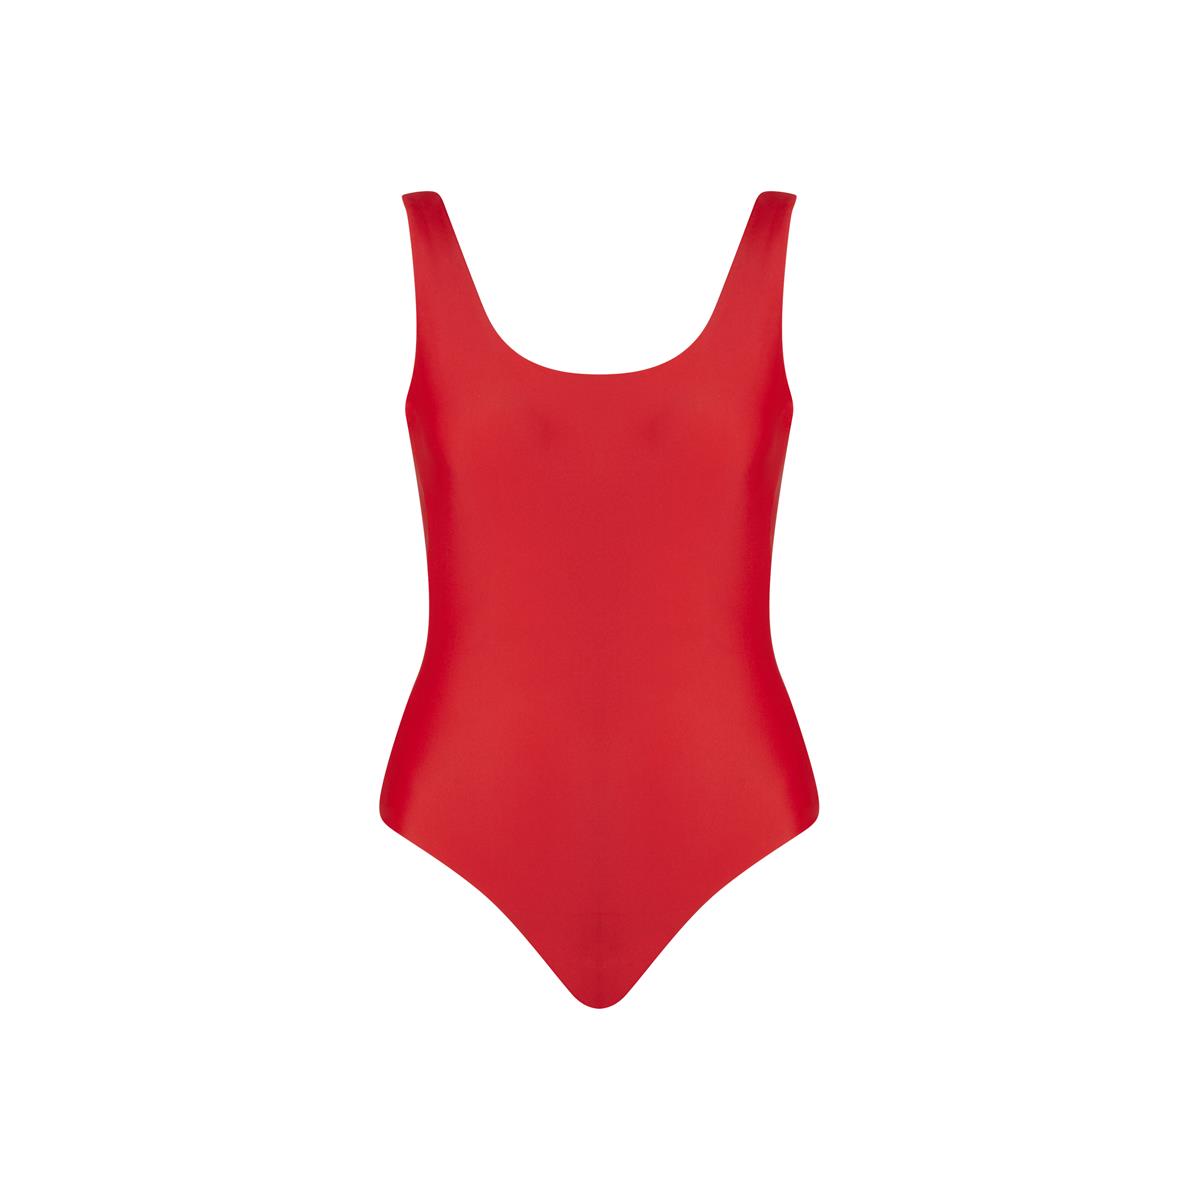 MARGARET AND HERMIONE_SS18_Swimsuit No.5_red_EUR 159,00